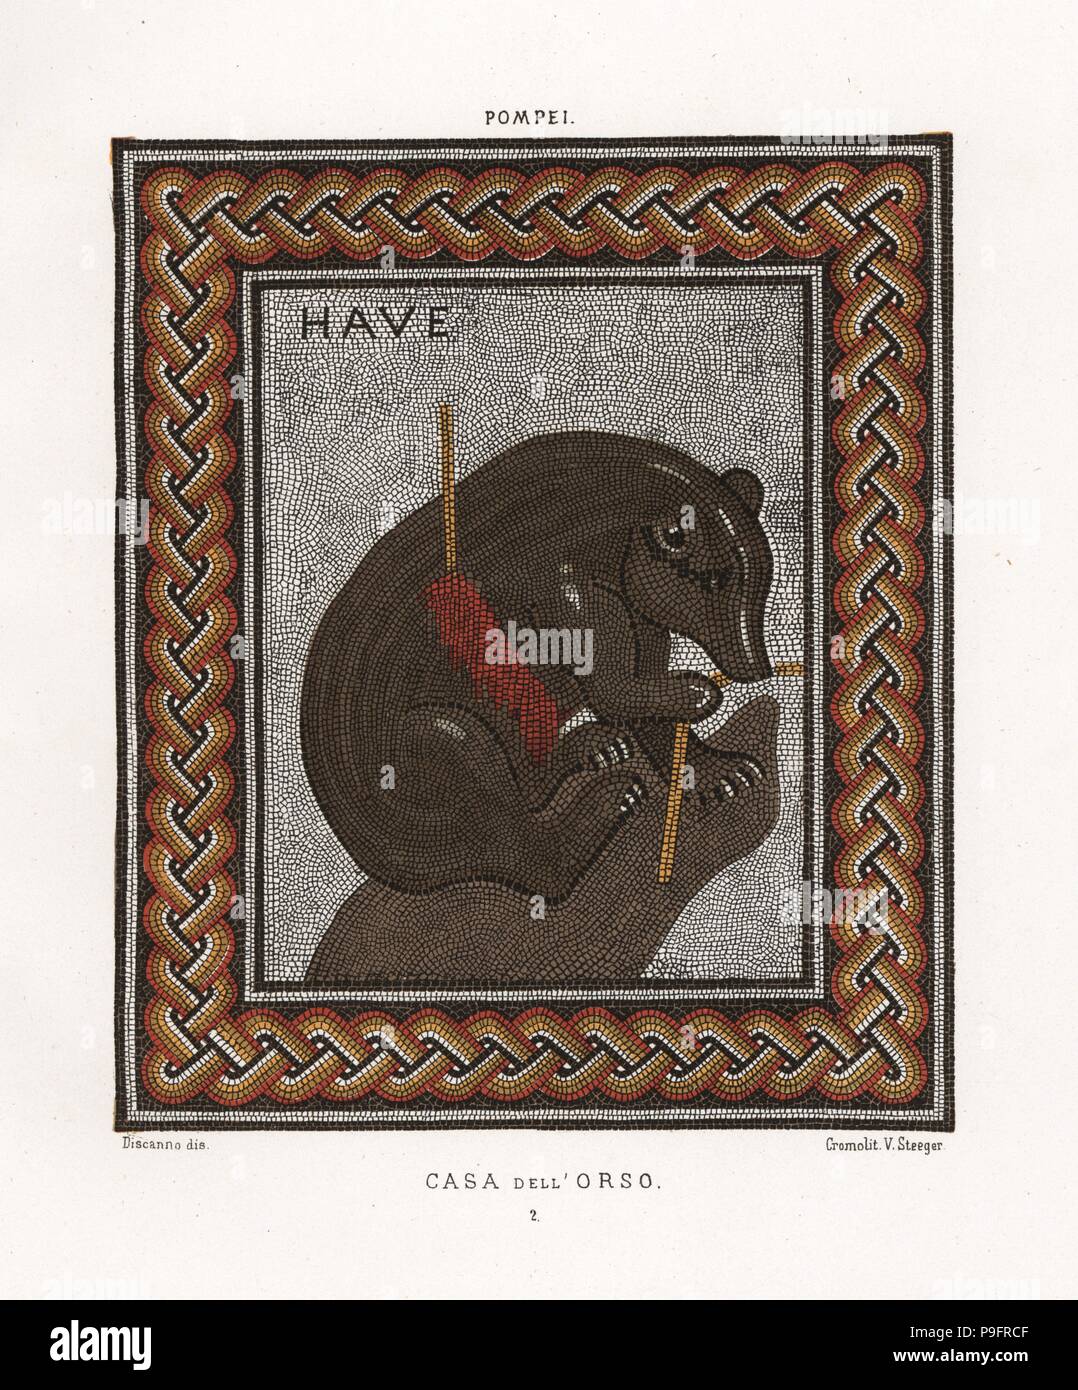 Mosaic of a bear wounded with a spear from the Casa dell'Orso, House of the Bear, VII.II.45. Chromolithograph by Victor Steeger after an illustration by Geremia Discanno from Emile Presuhn’s Les Plus Belles Peintures de Pompei (The Most Beautiful Paintings of Pompeii), Leipzig, 1881. Stock Photo